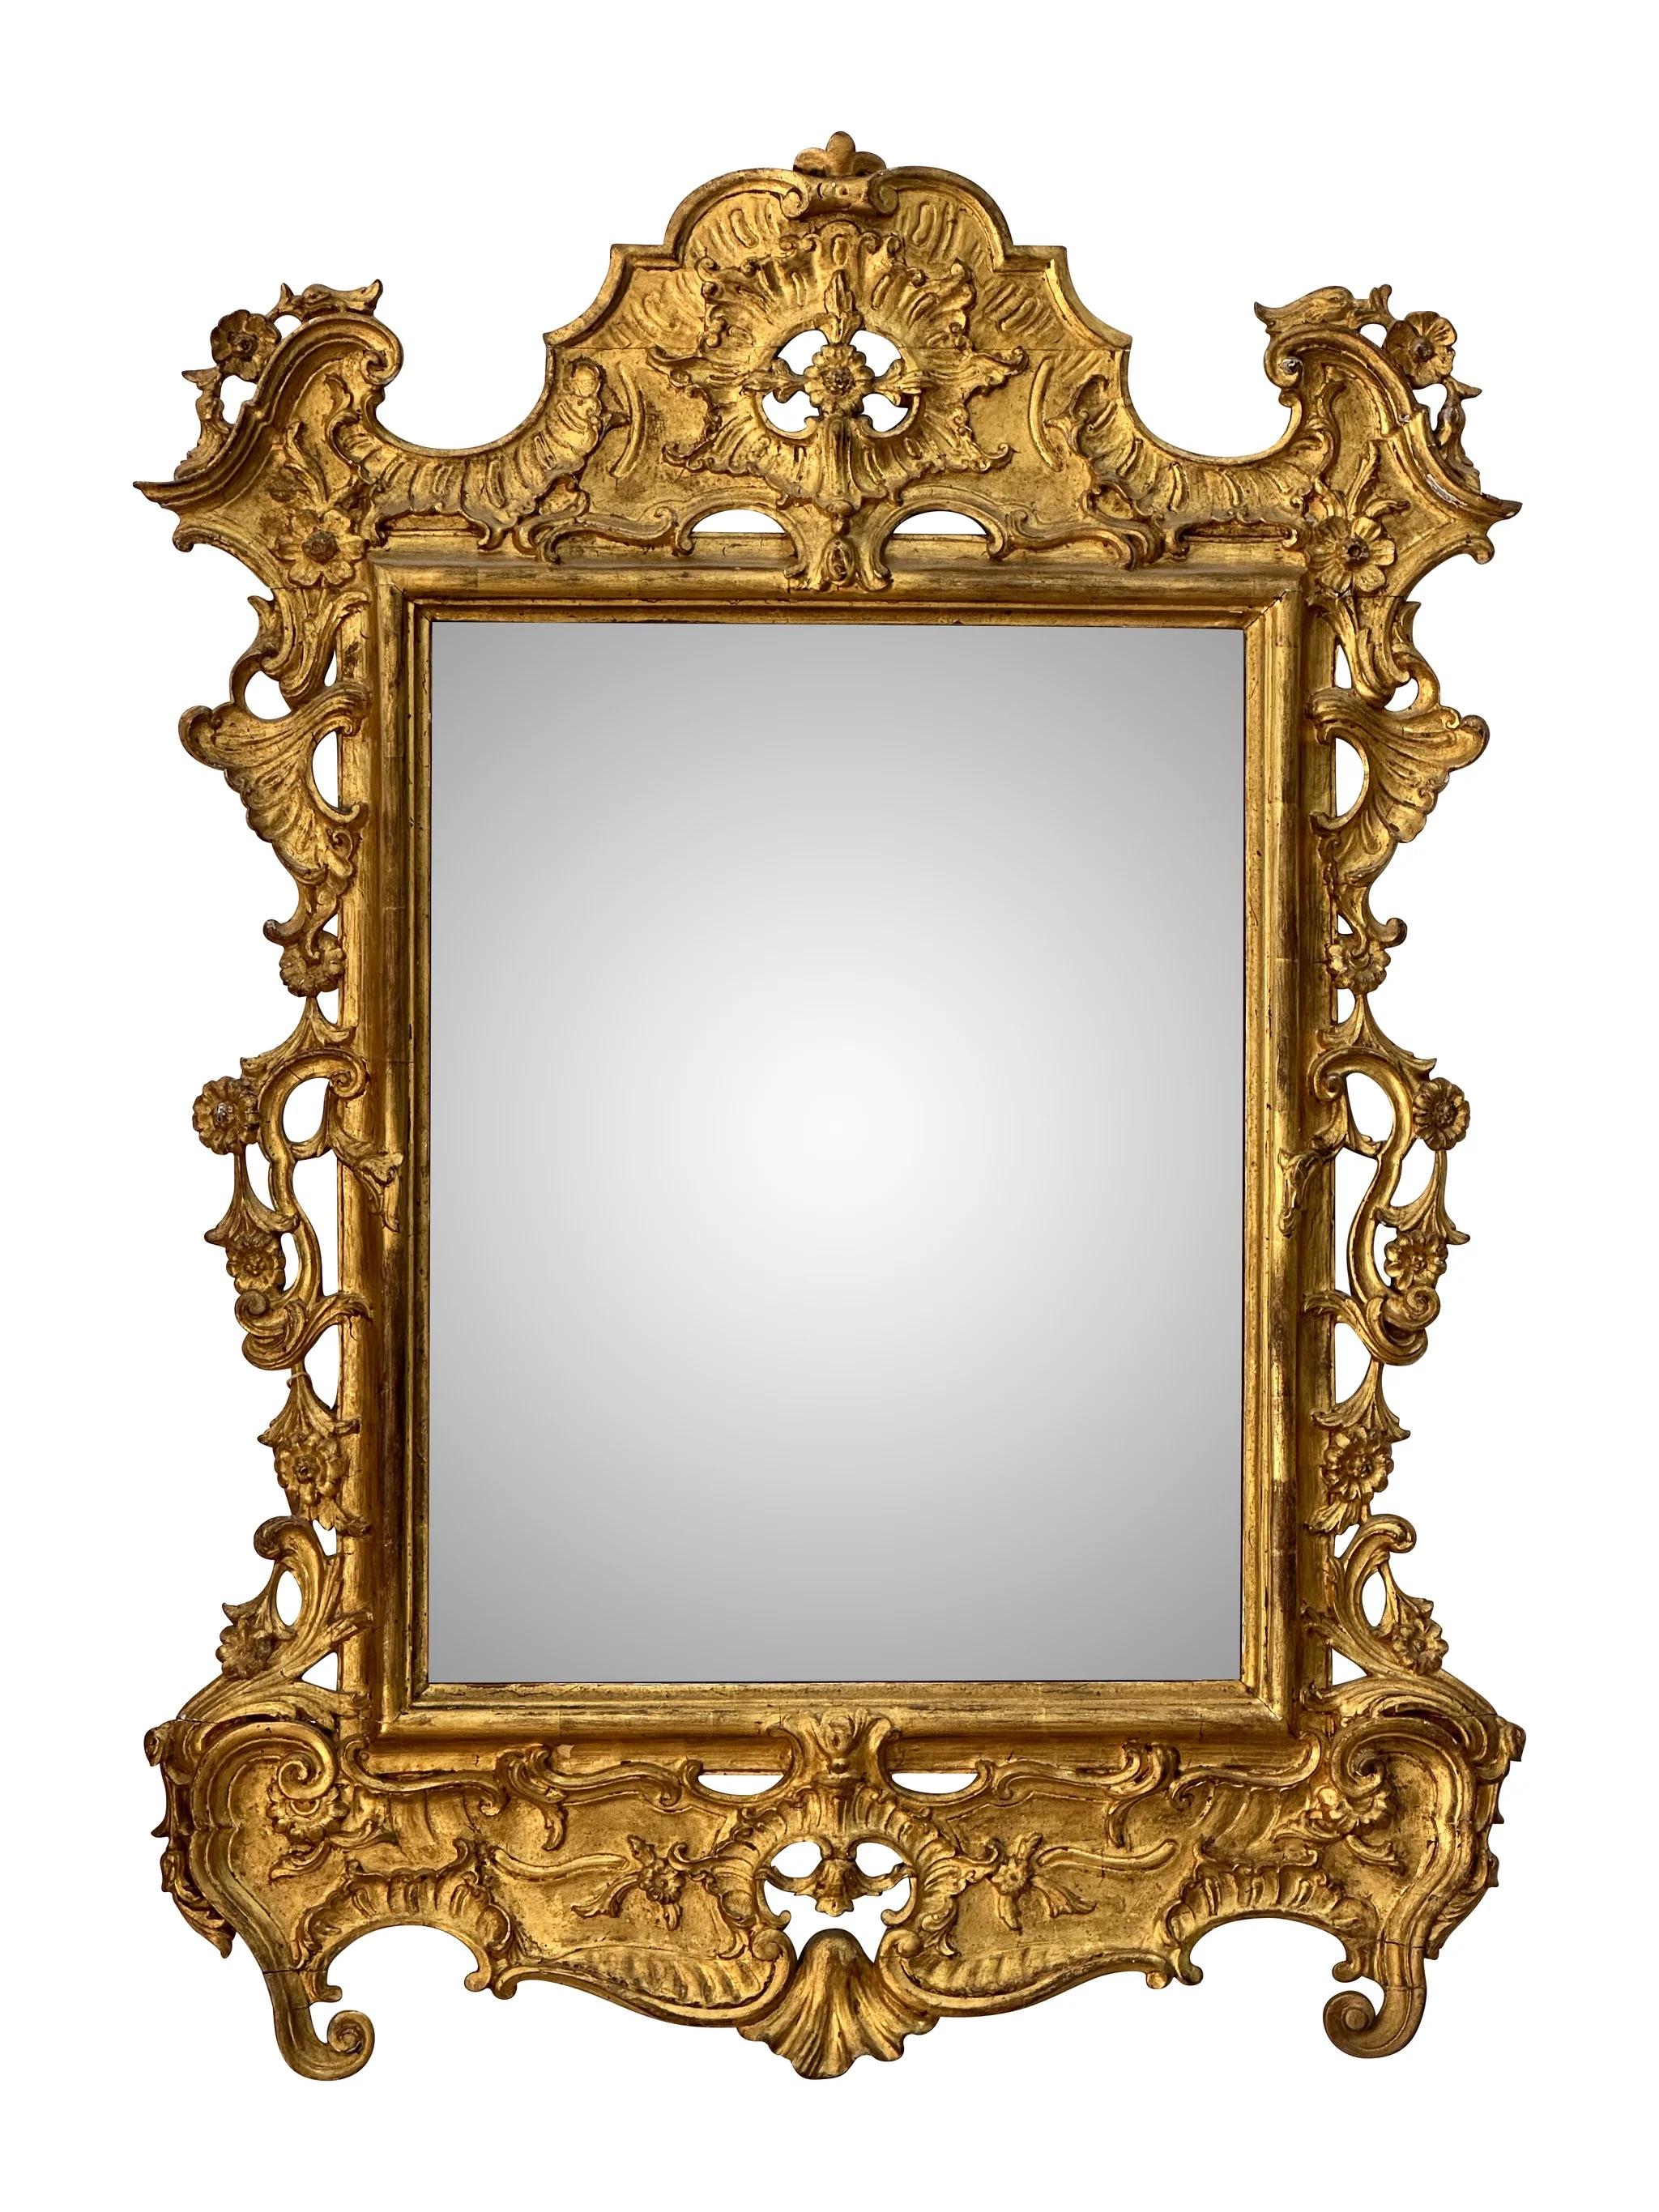 Giltwood Beautifully Carved, Gilded 18th Century Mirror For Sale